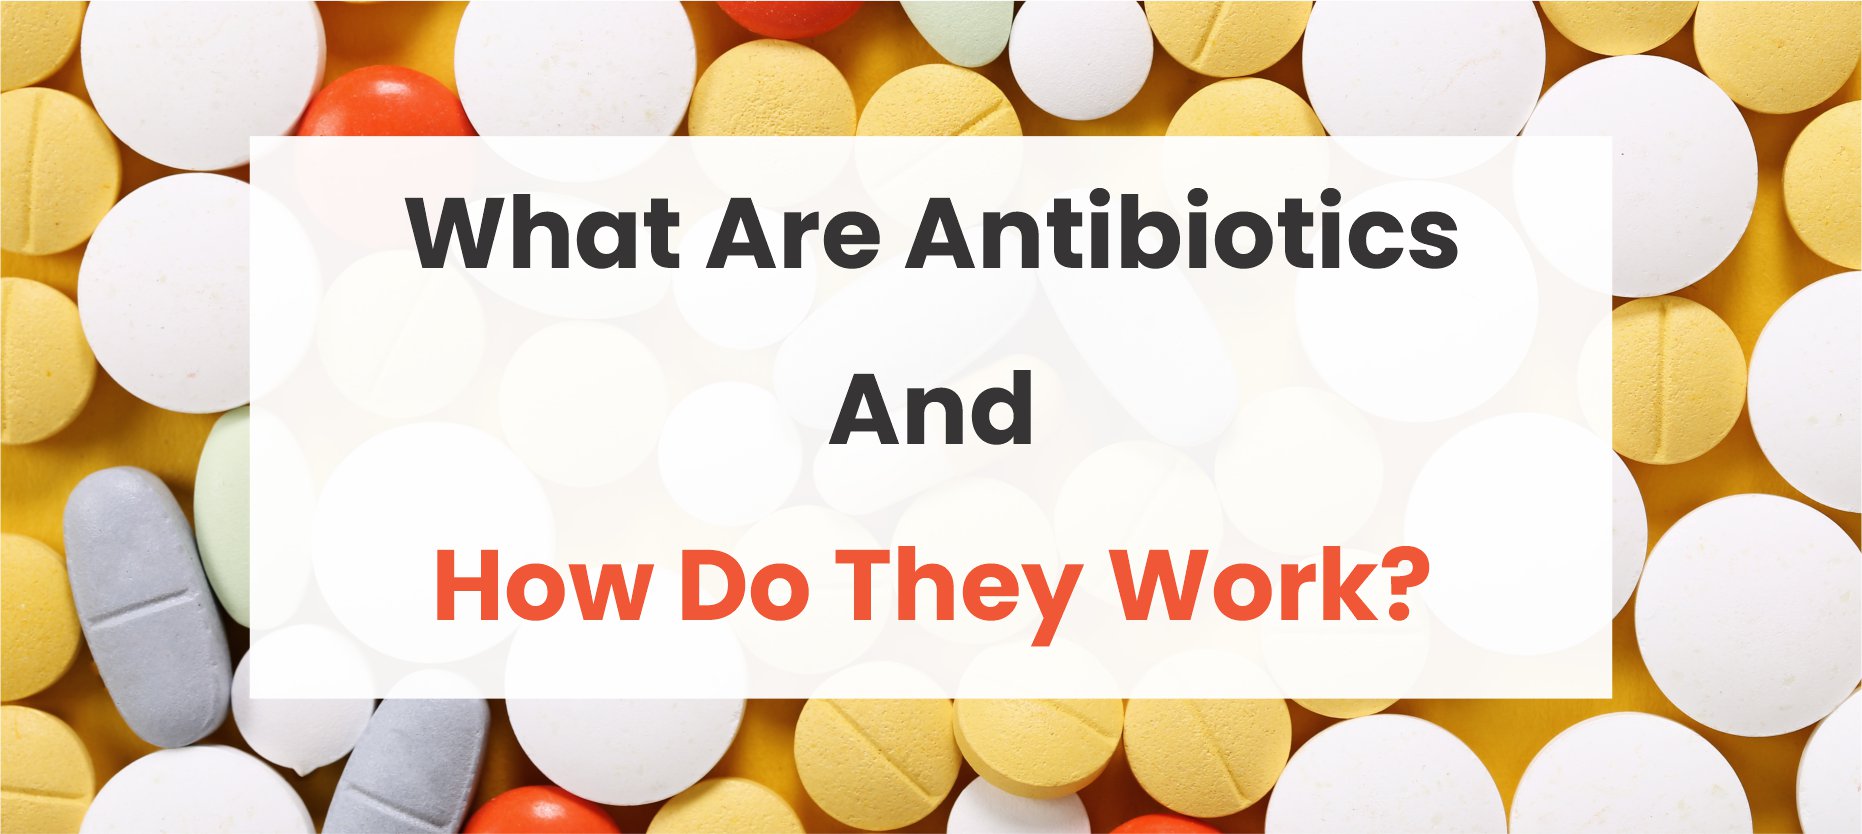 What are Antibiotics and How do they Work?